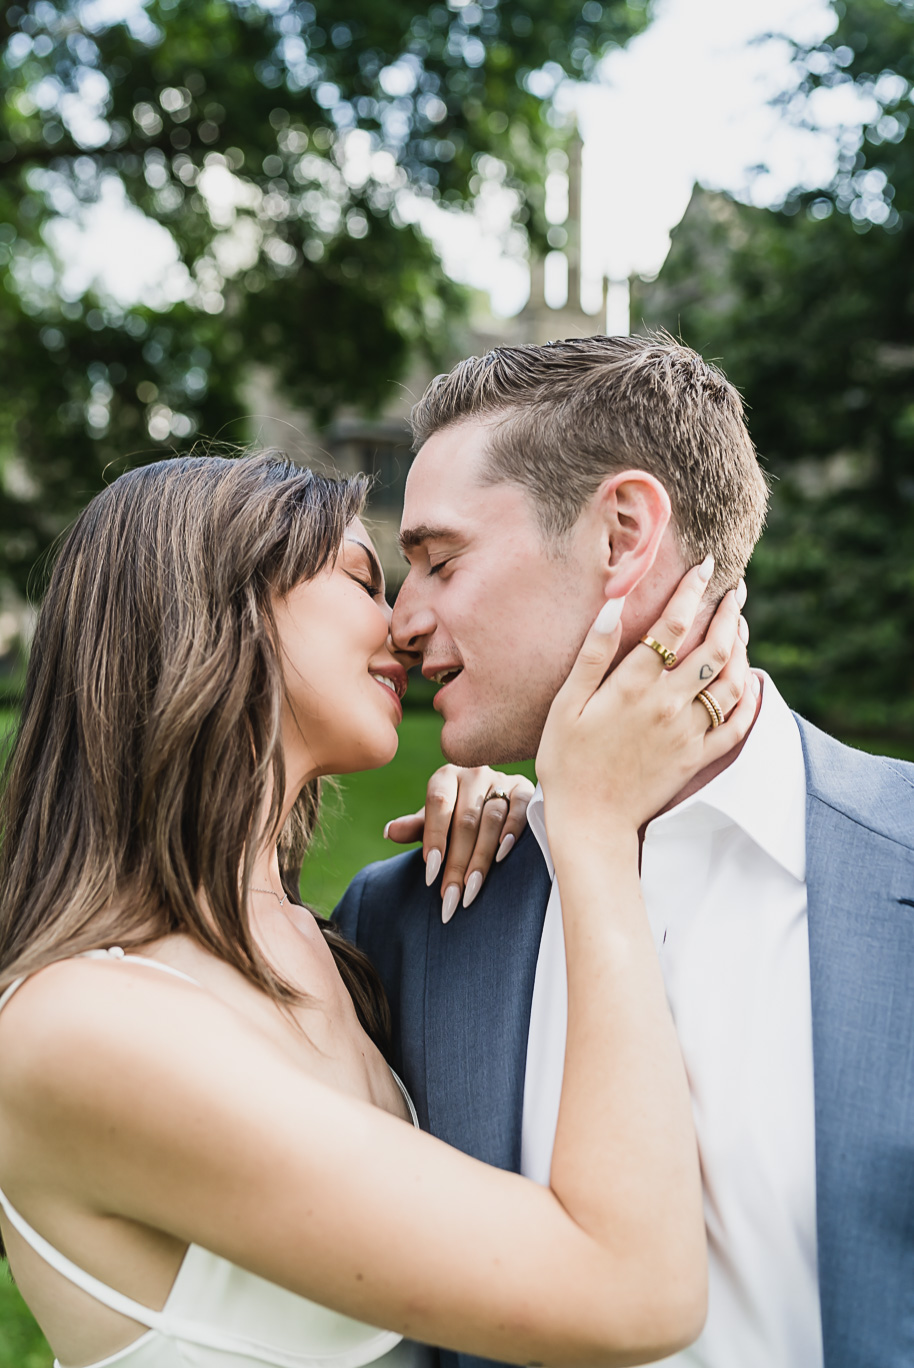 Summer Ford house engagement photos in Grosse Pointe, Michigan provided by Kari Dawson top-rated southeastern Michigan wedding photographer.